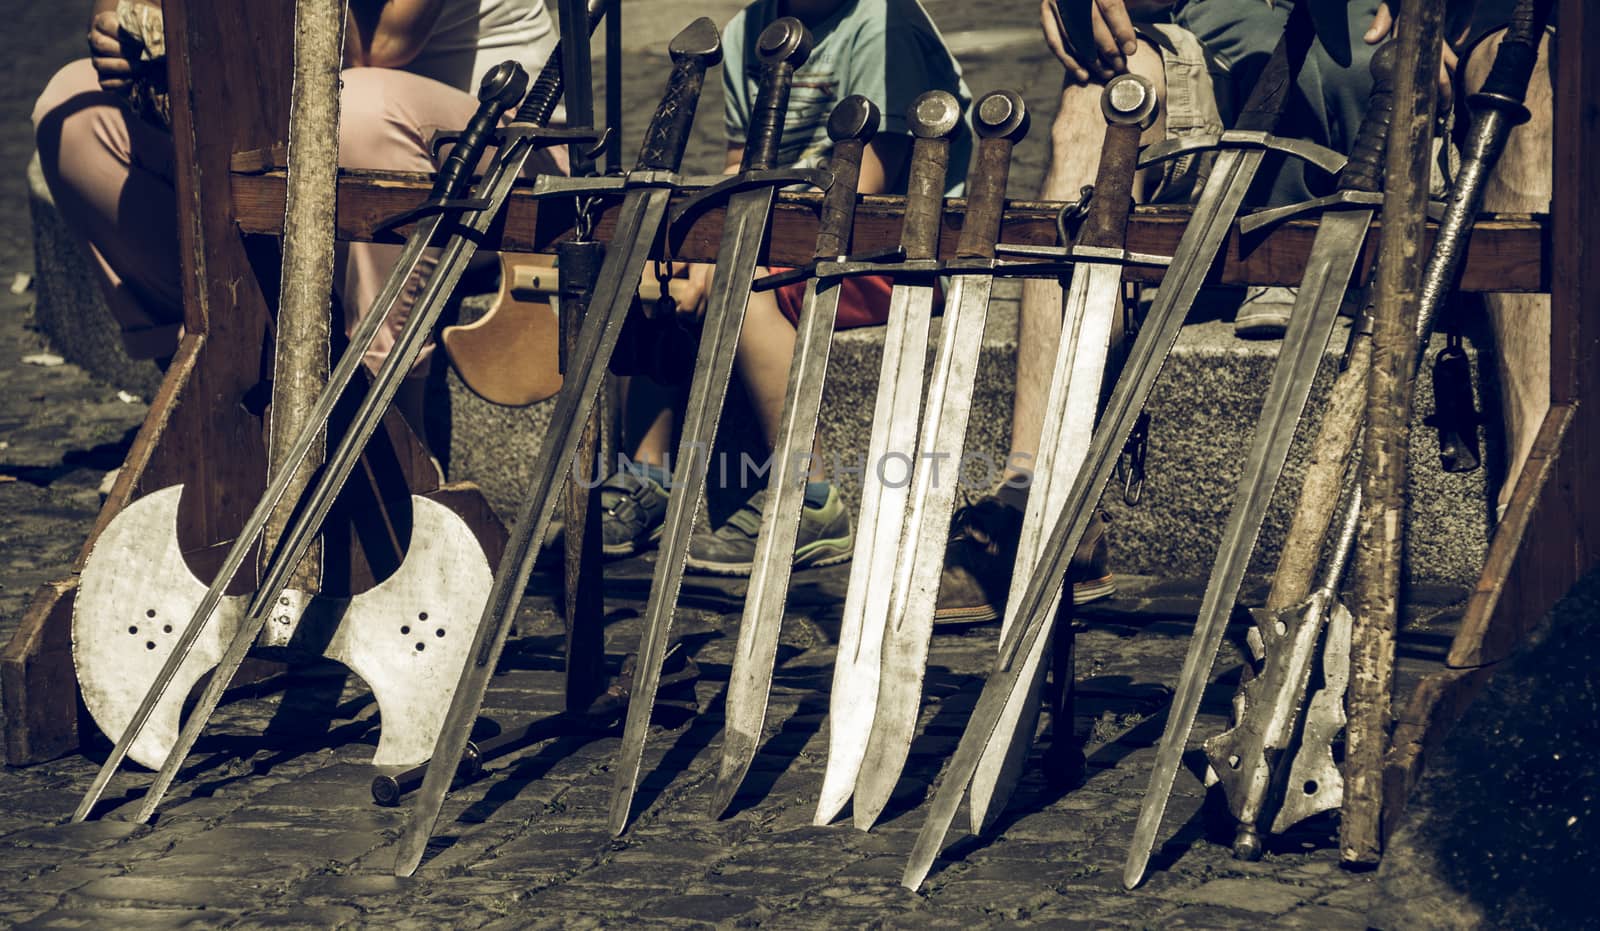 Swords set up in a row for the knight demonstration at a medieval market by geogif